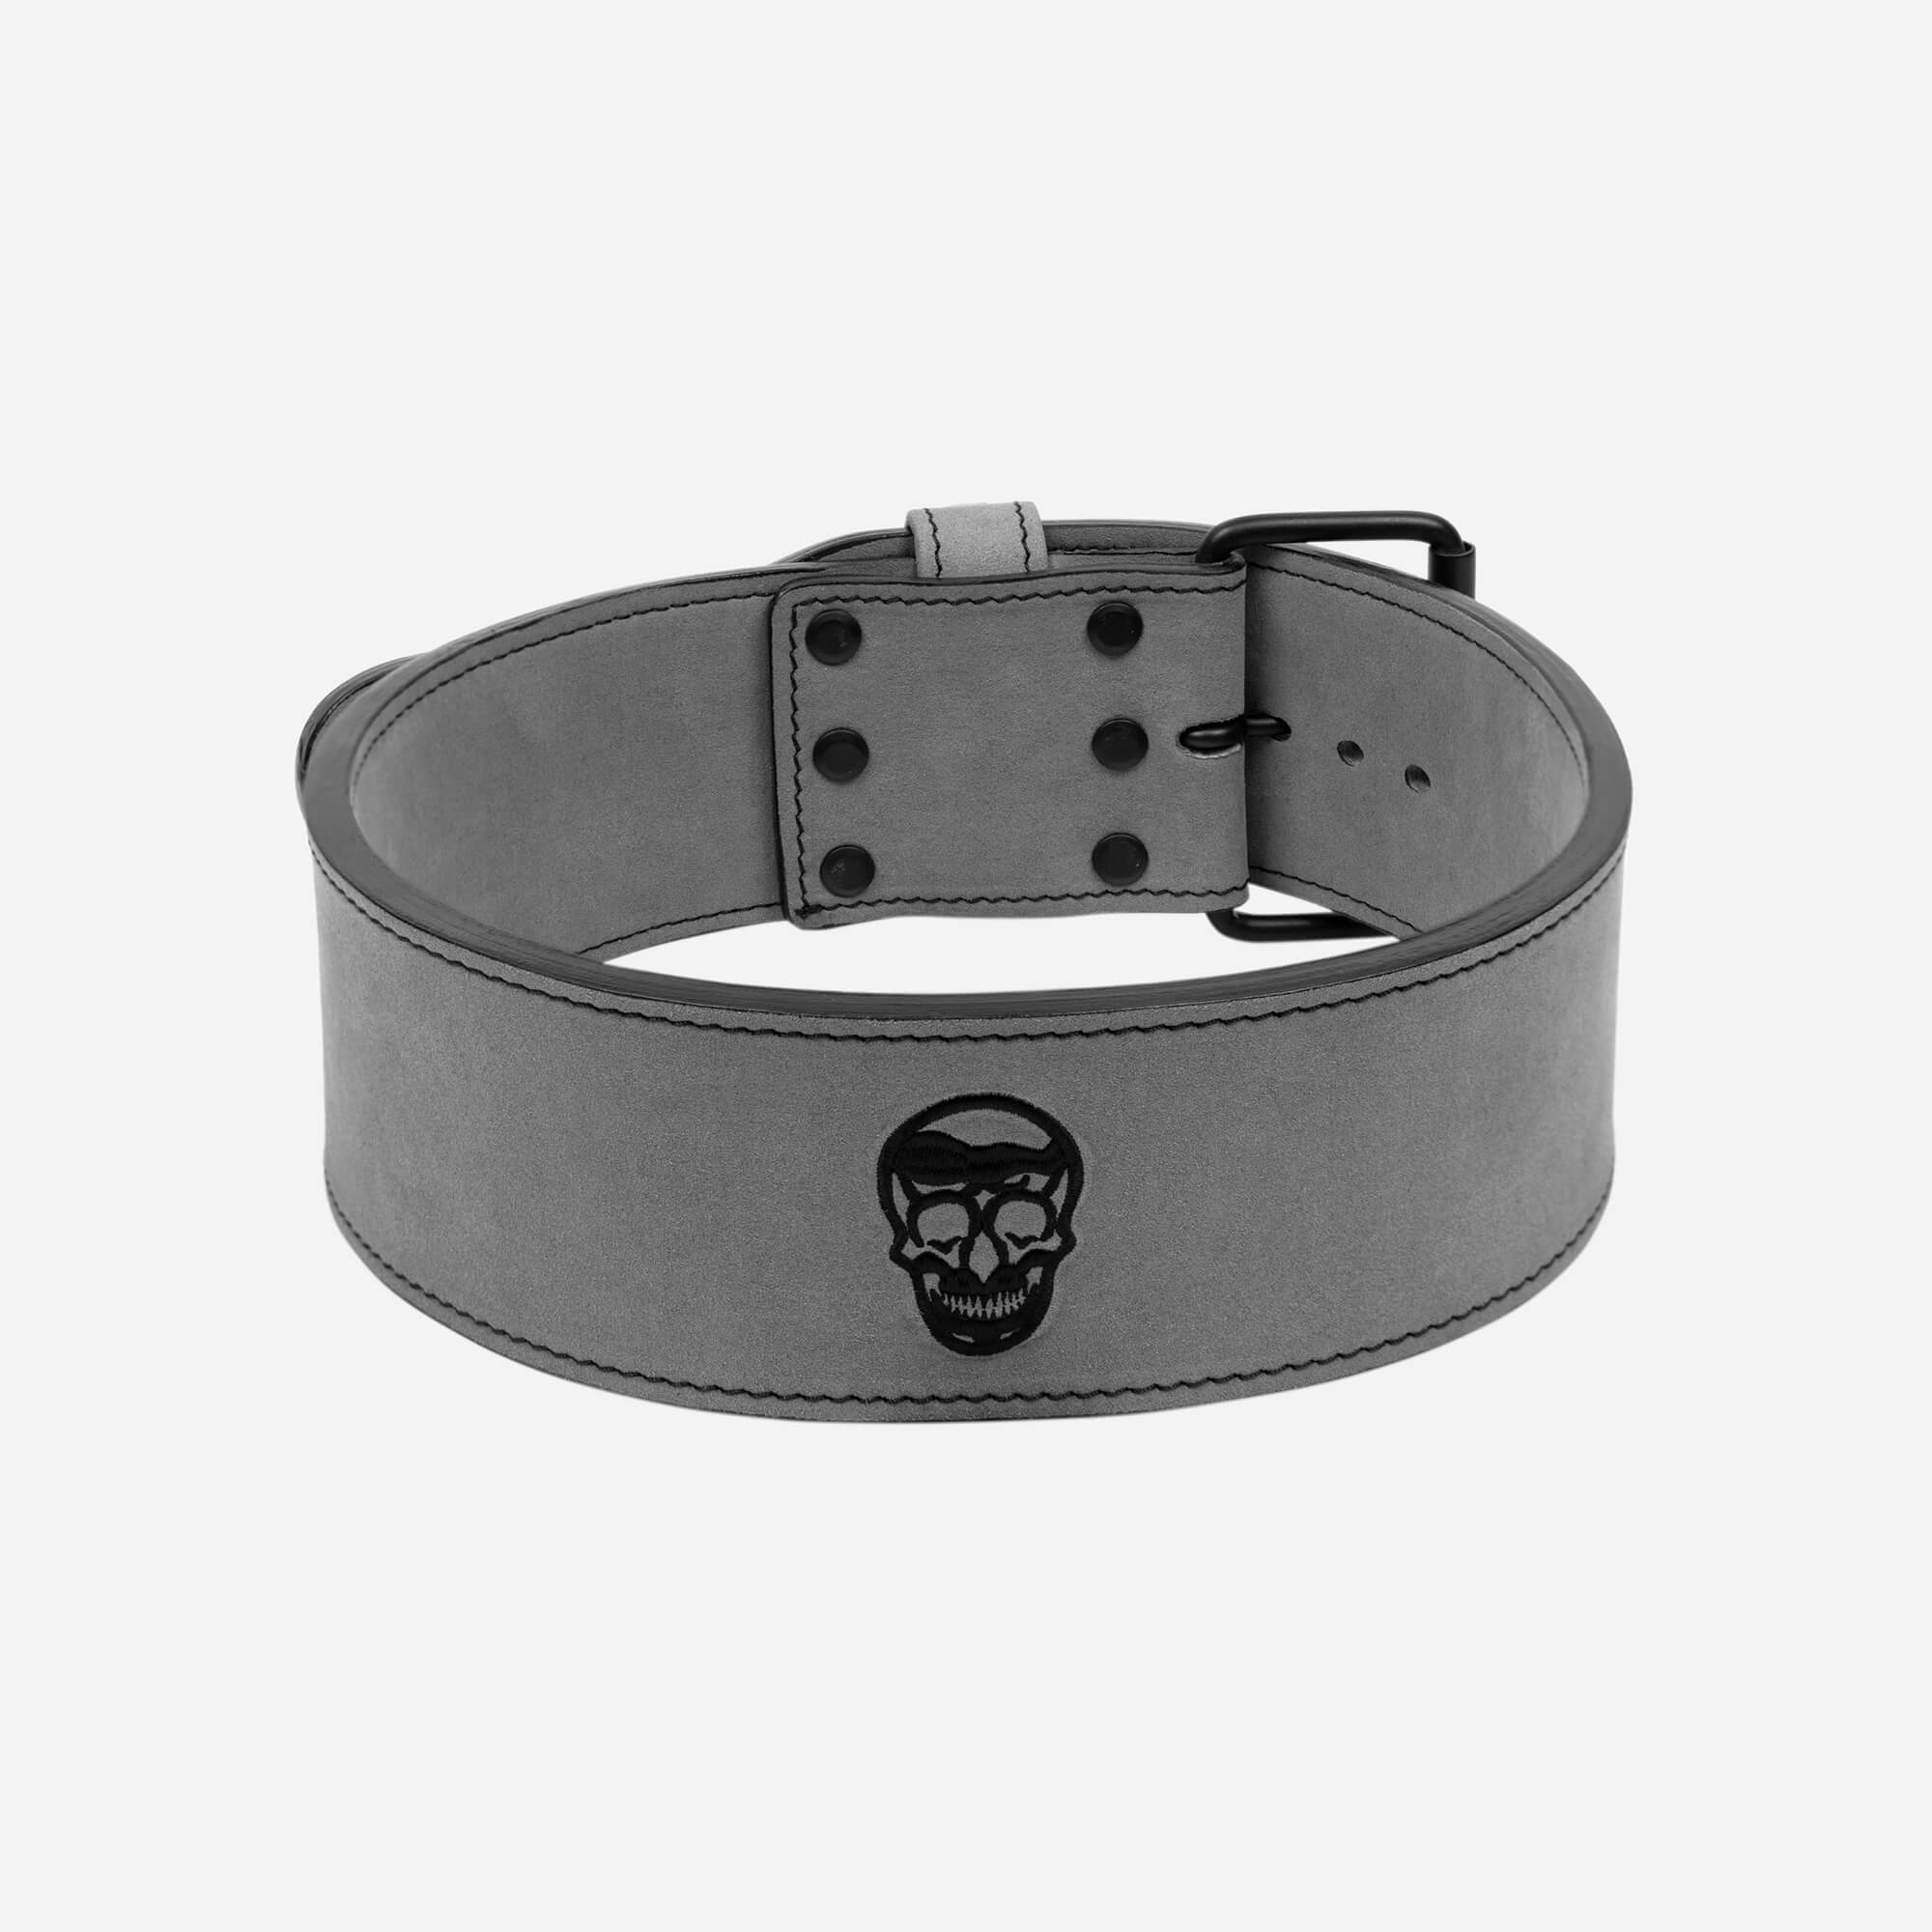 10MM Single Prong Weightlifting Belt - Gray